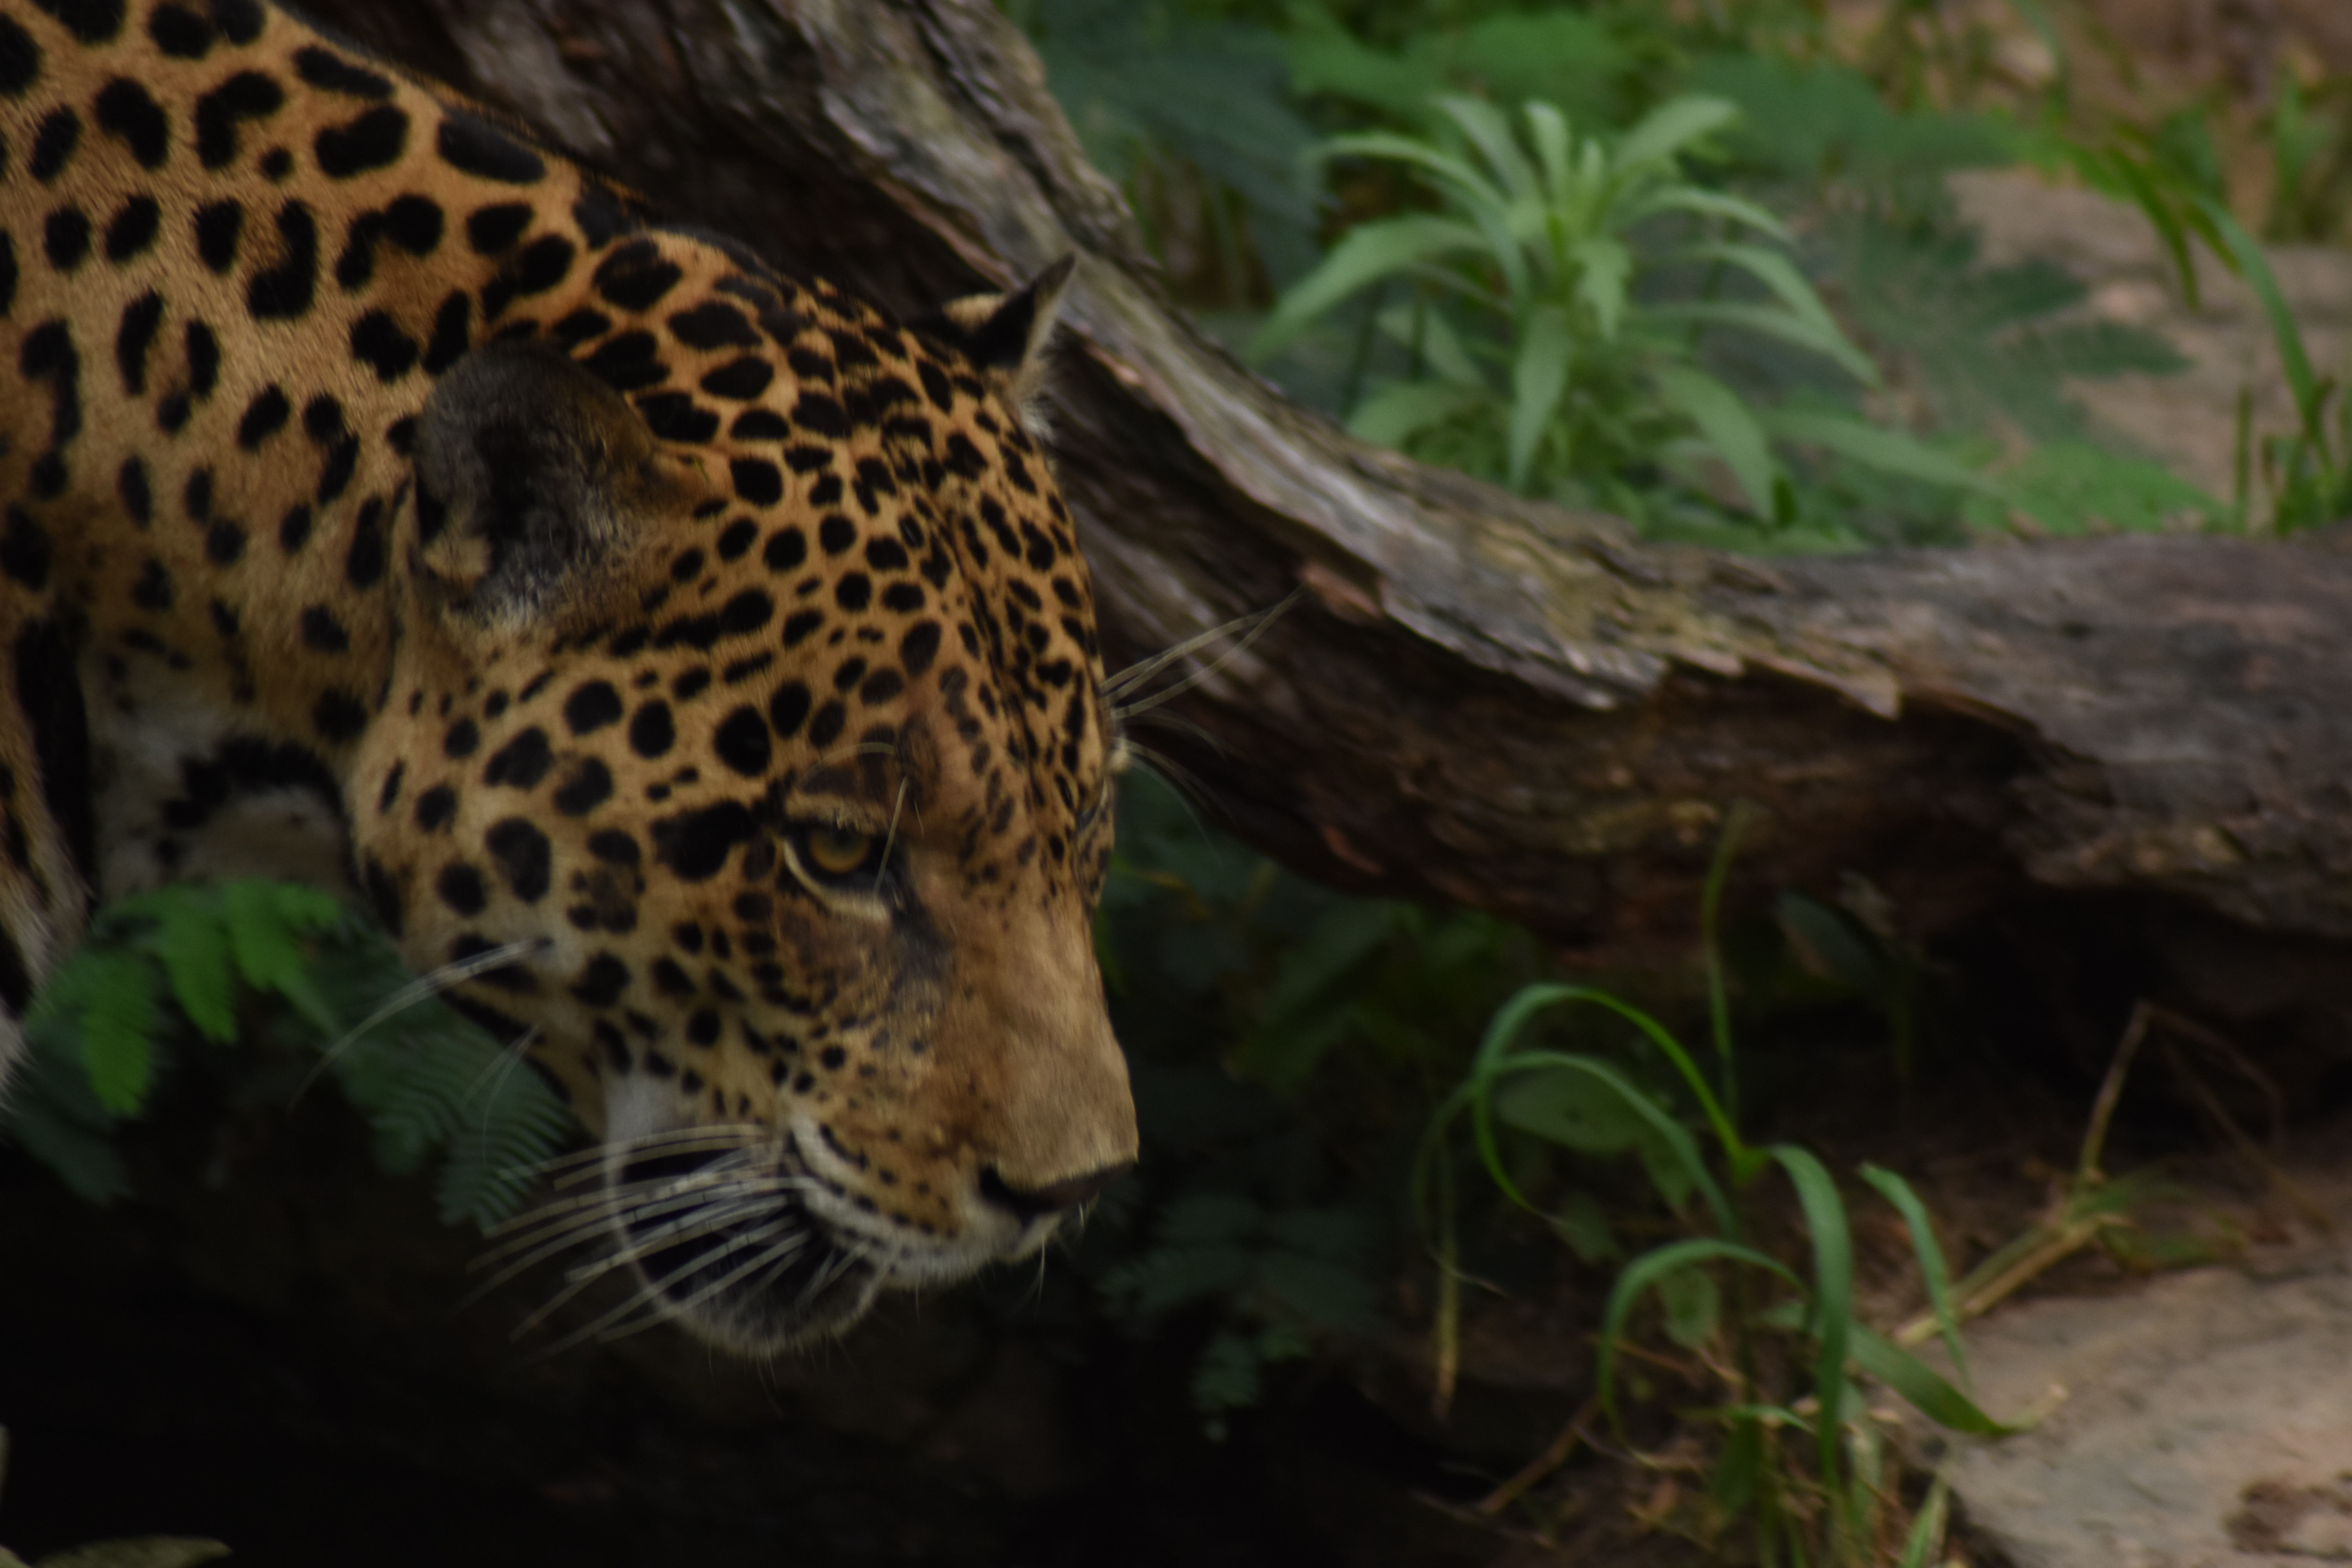 An animal under threat: the mysterious symbolism of the jaguar